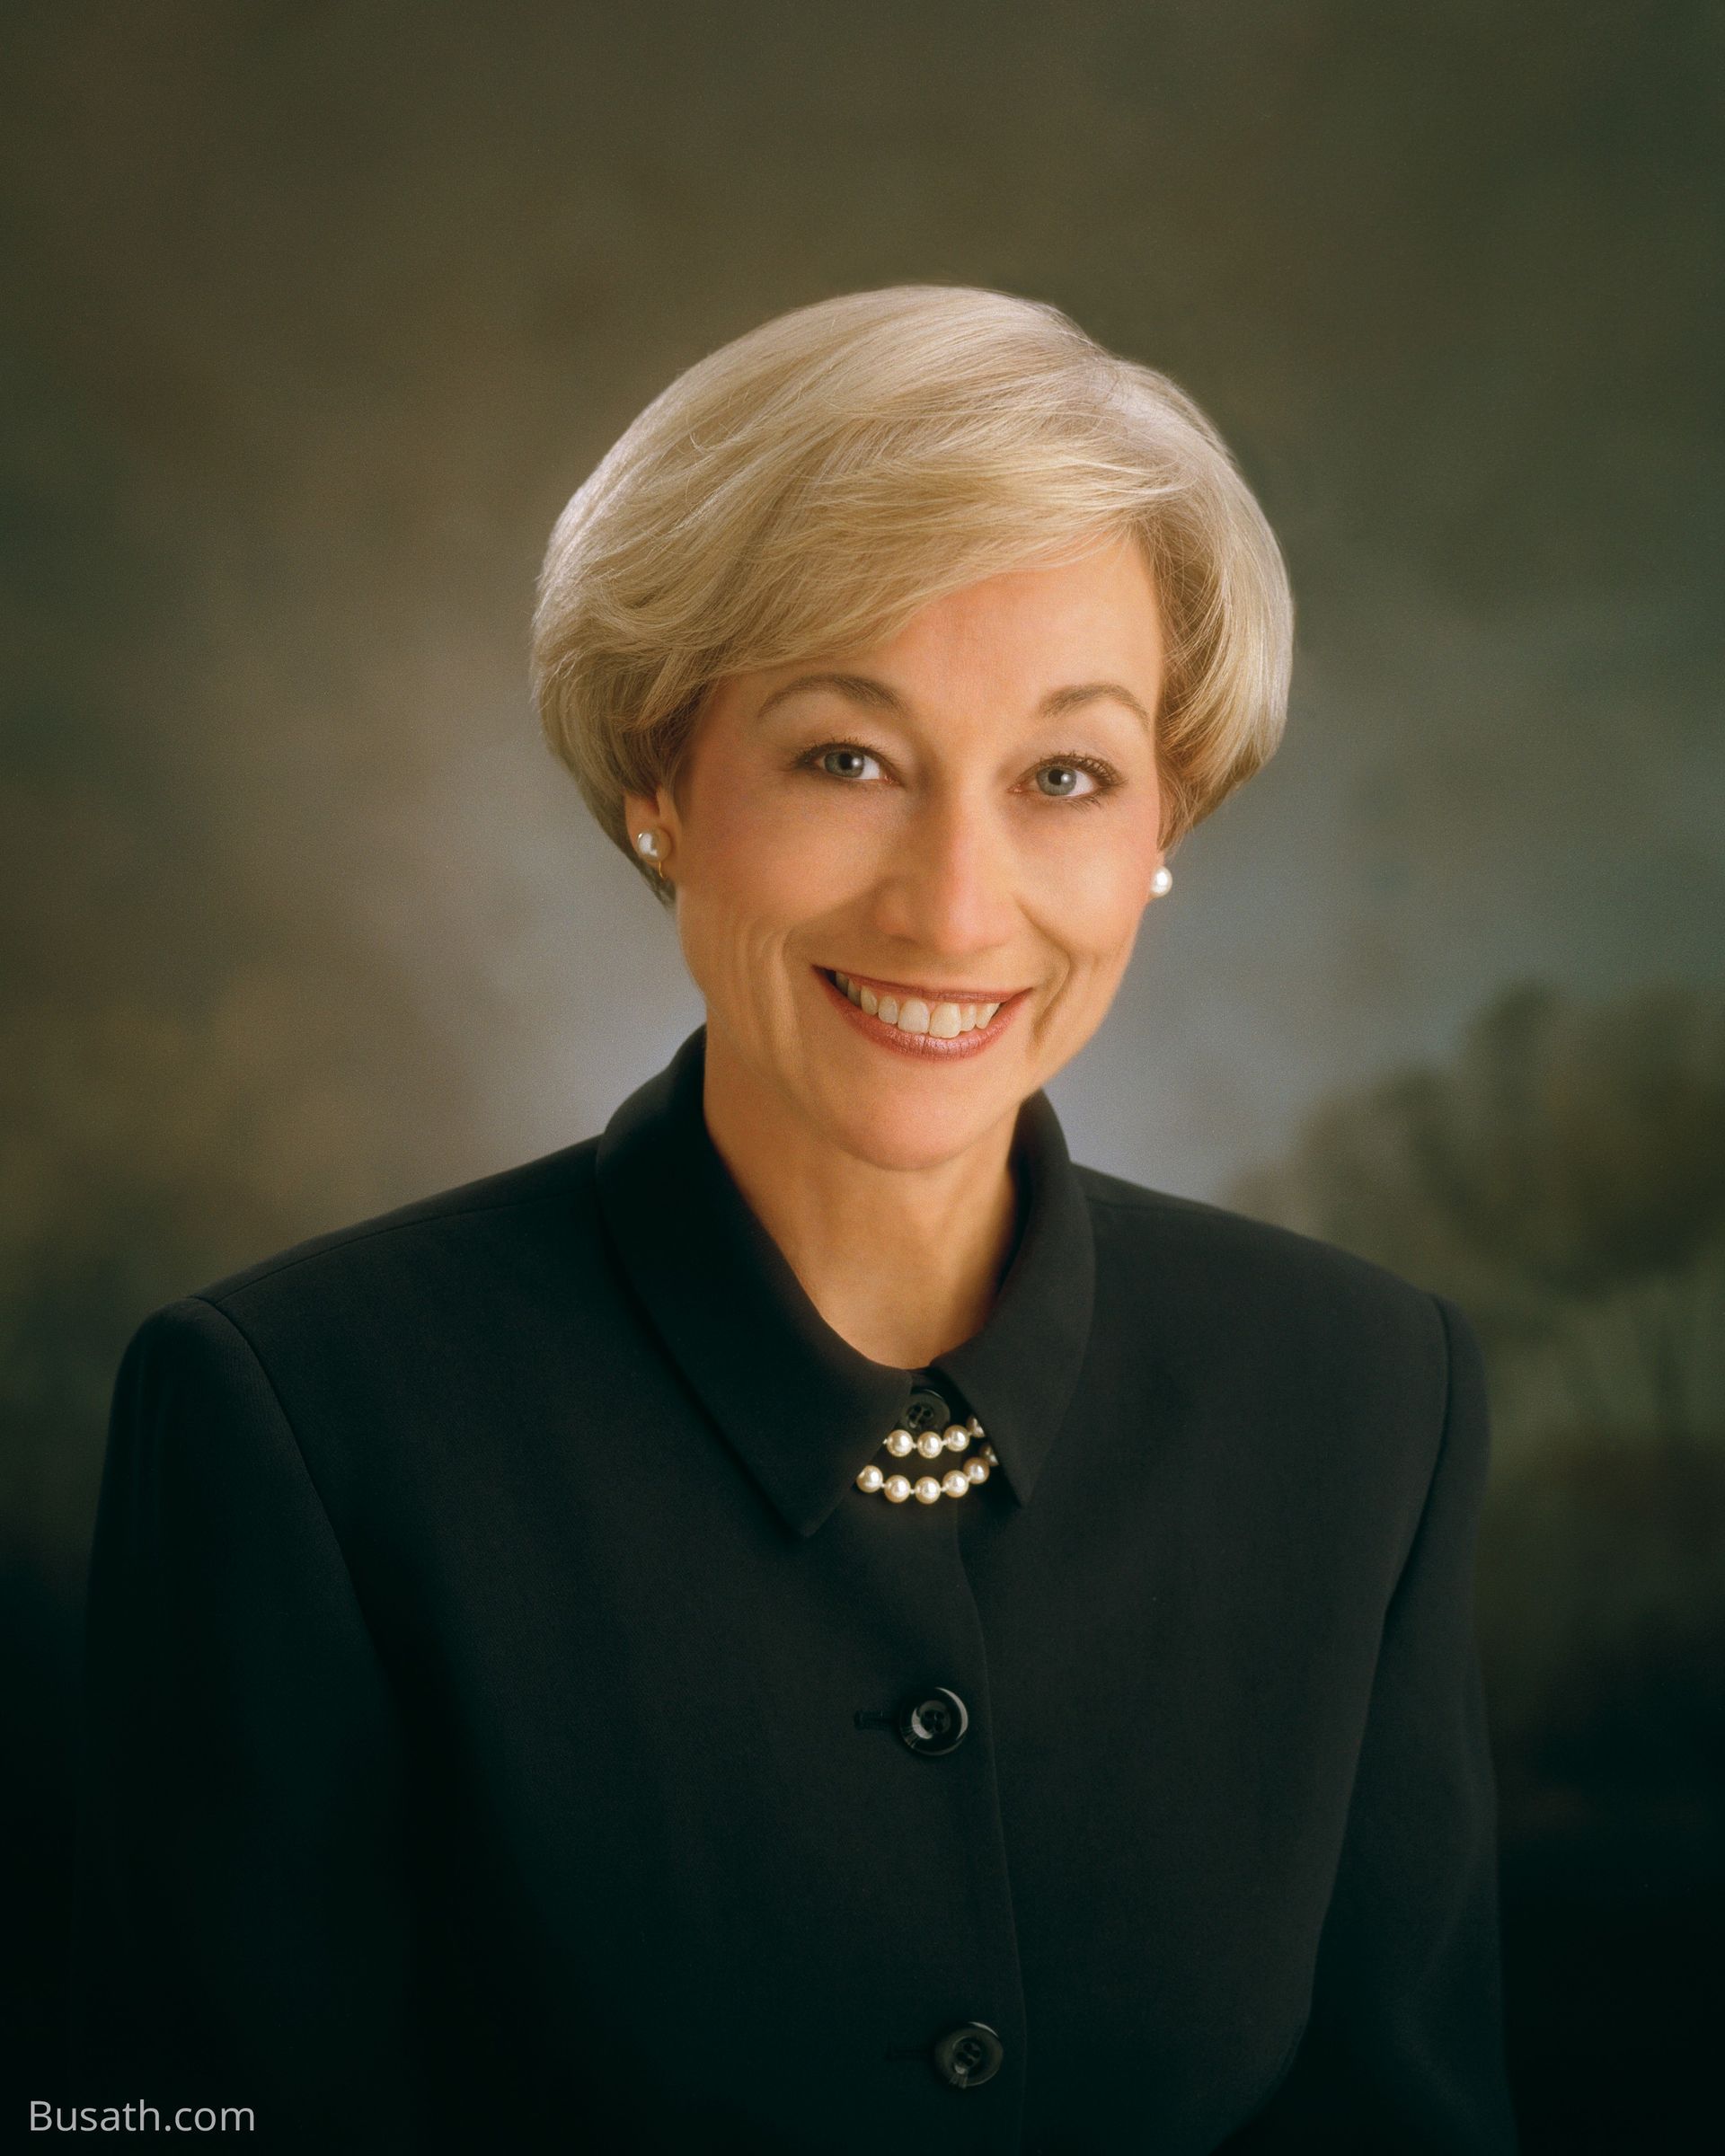 A portrait of Coleen Kent Menlove, taken while she was serving as the 10th Primary general president from 1999 to 2005.